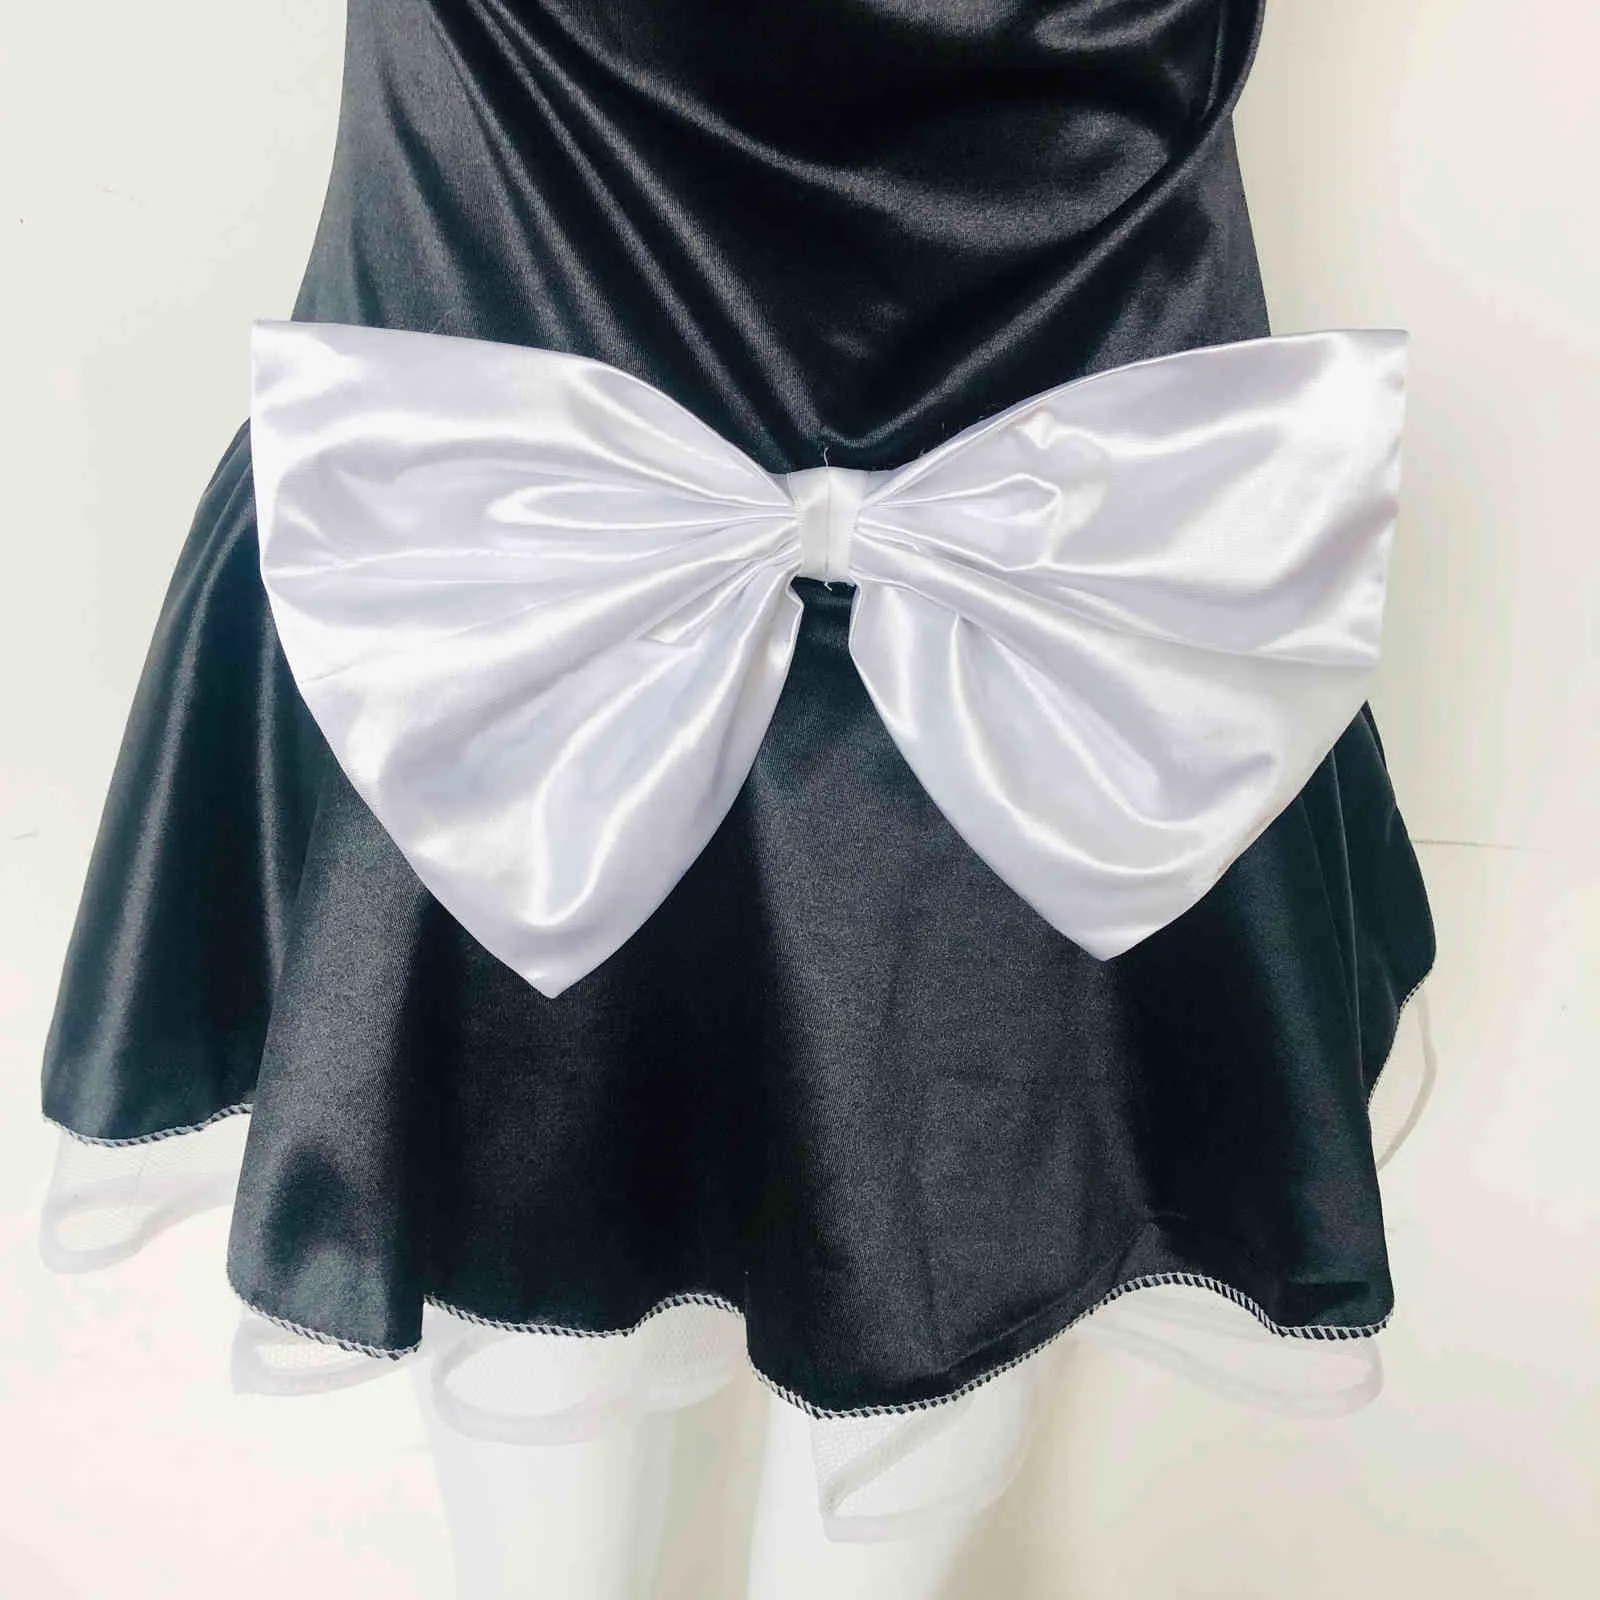 Utmeon Plus size S-6XL Sexy Costumes Women's Night French Maid Cosplay Costume For Halloween Women's Exotic Servant Dress L0407